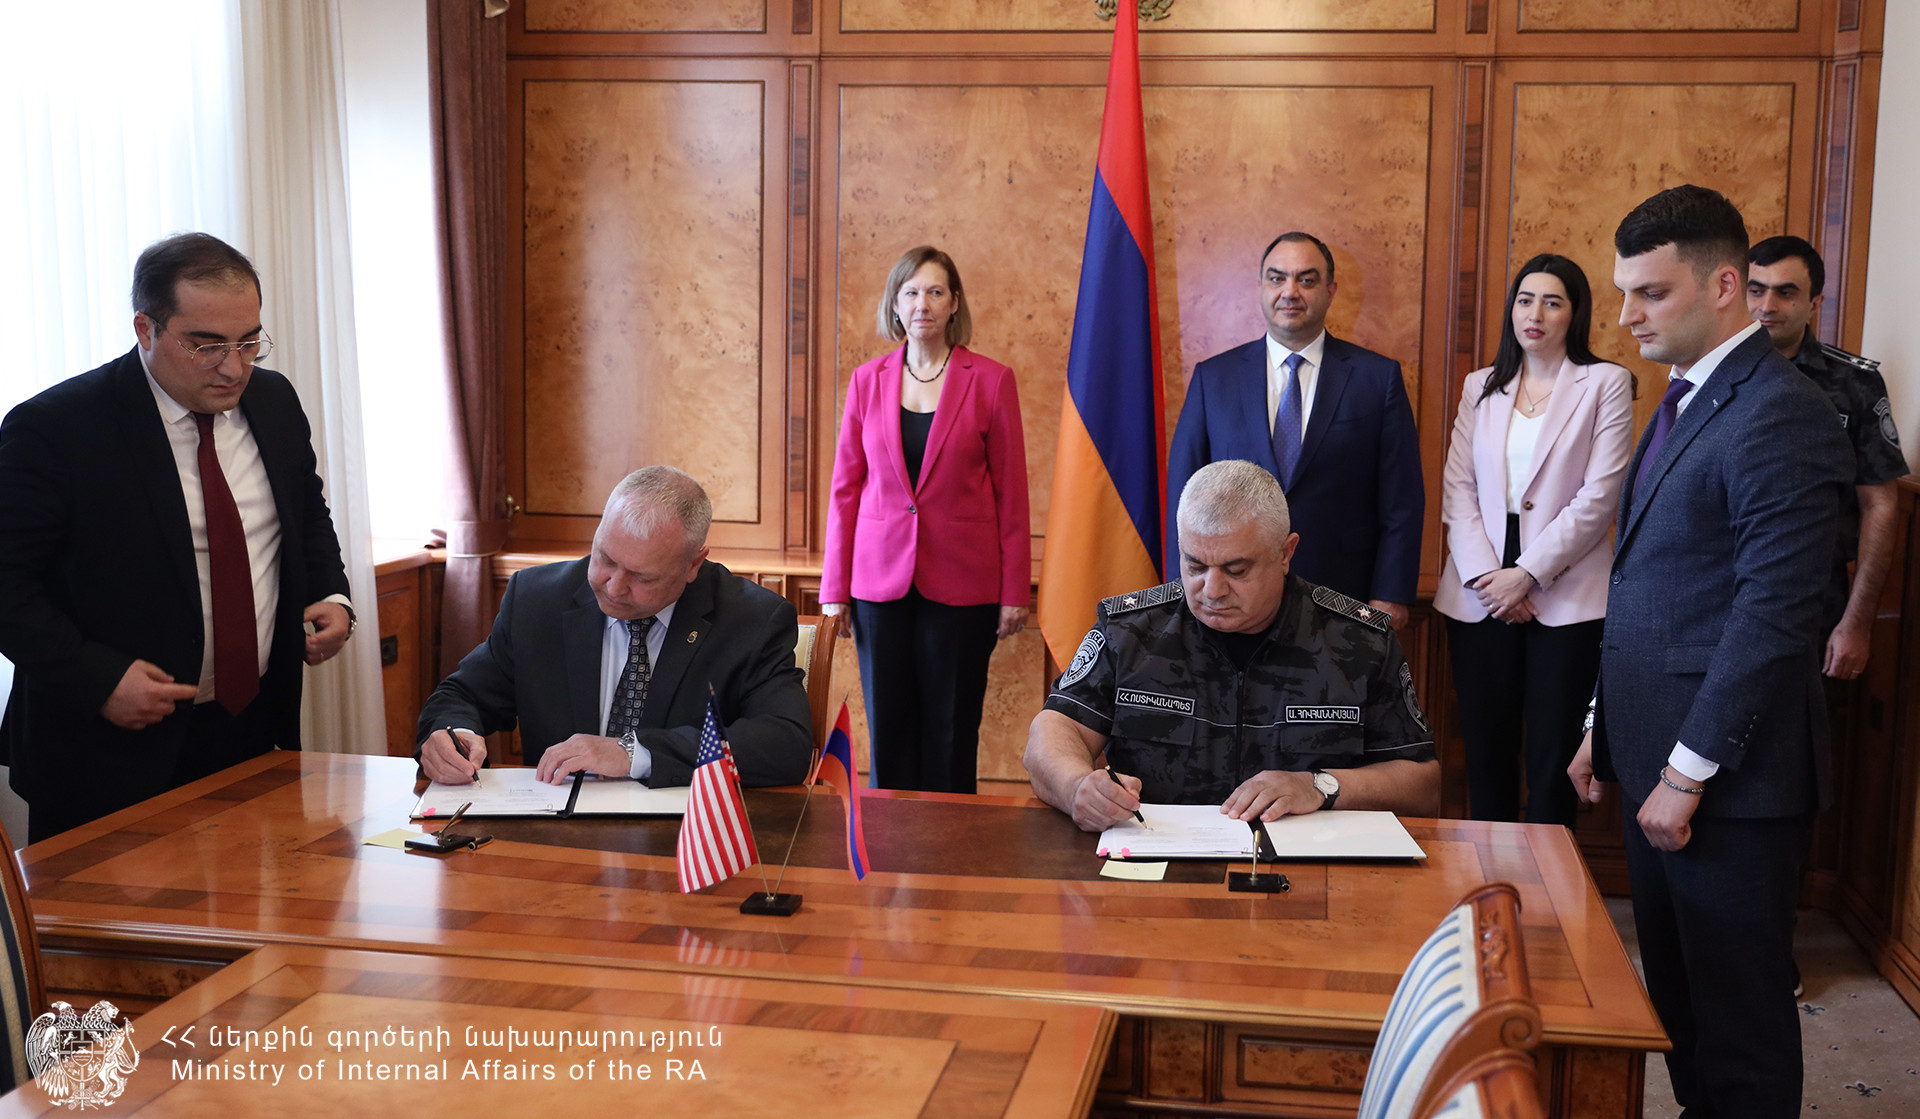 This partnership will help protect our communities in US and Armenia: Ambassador Kvien